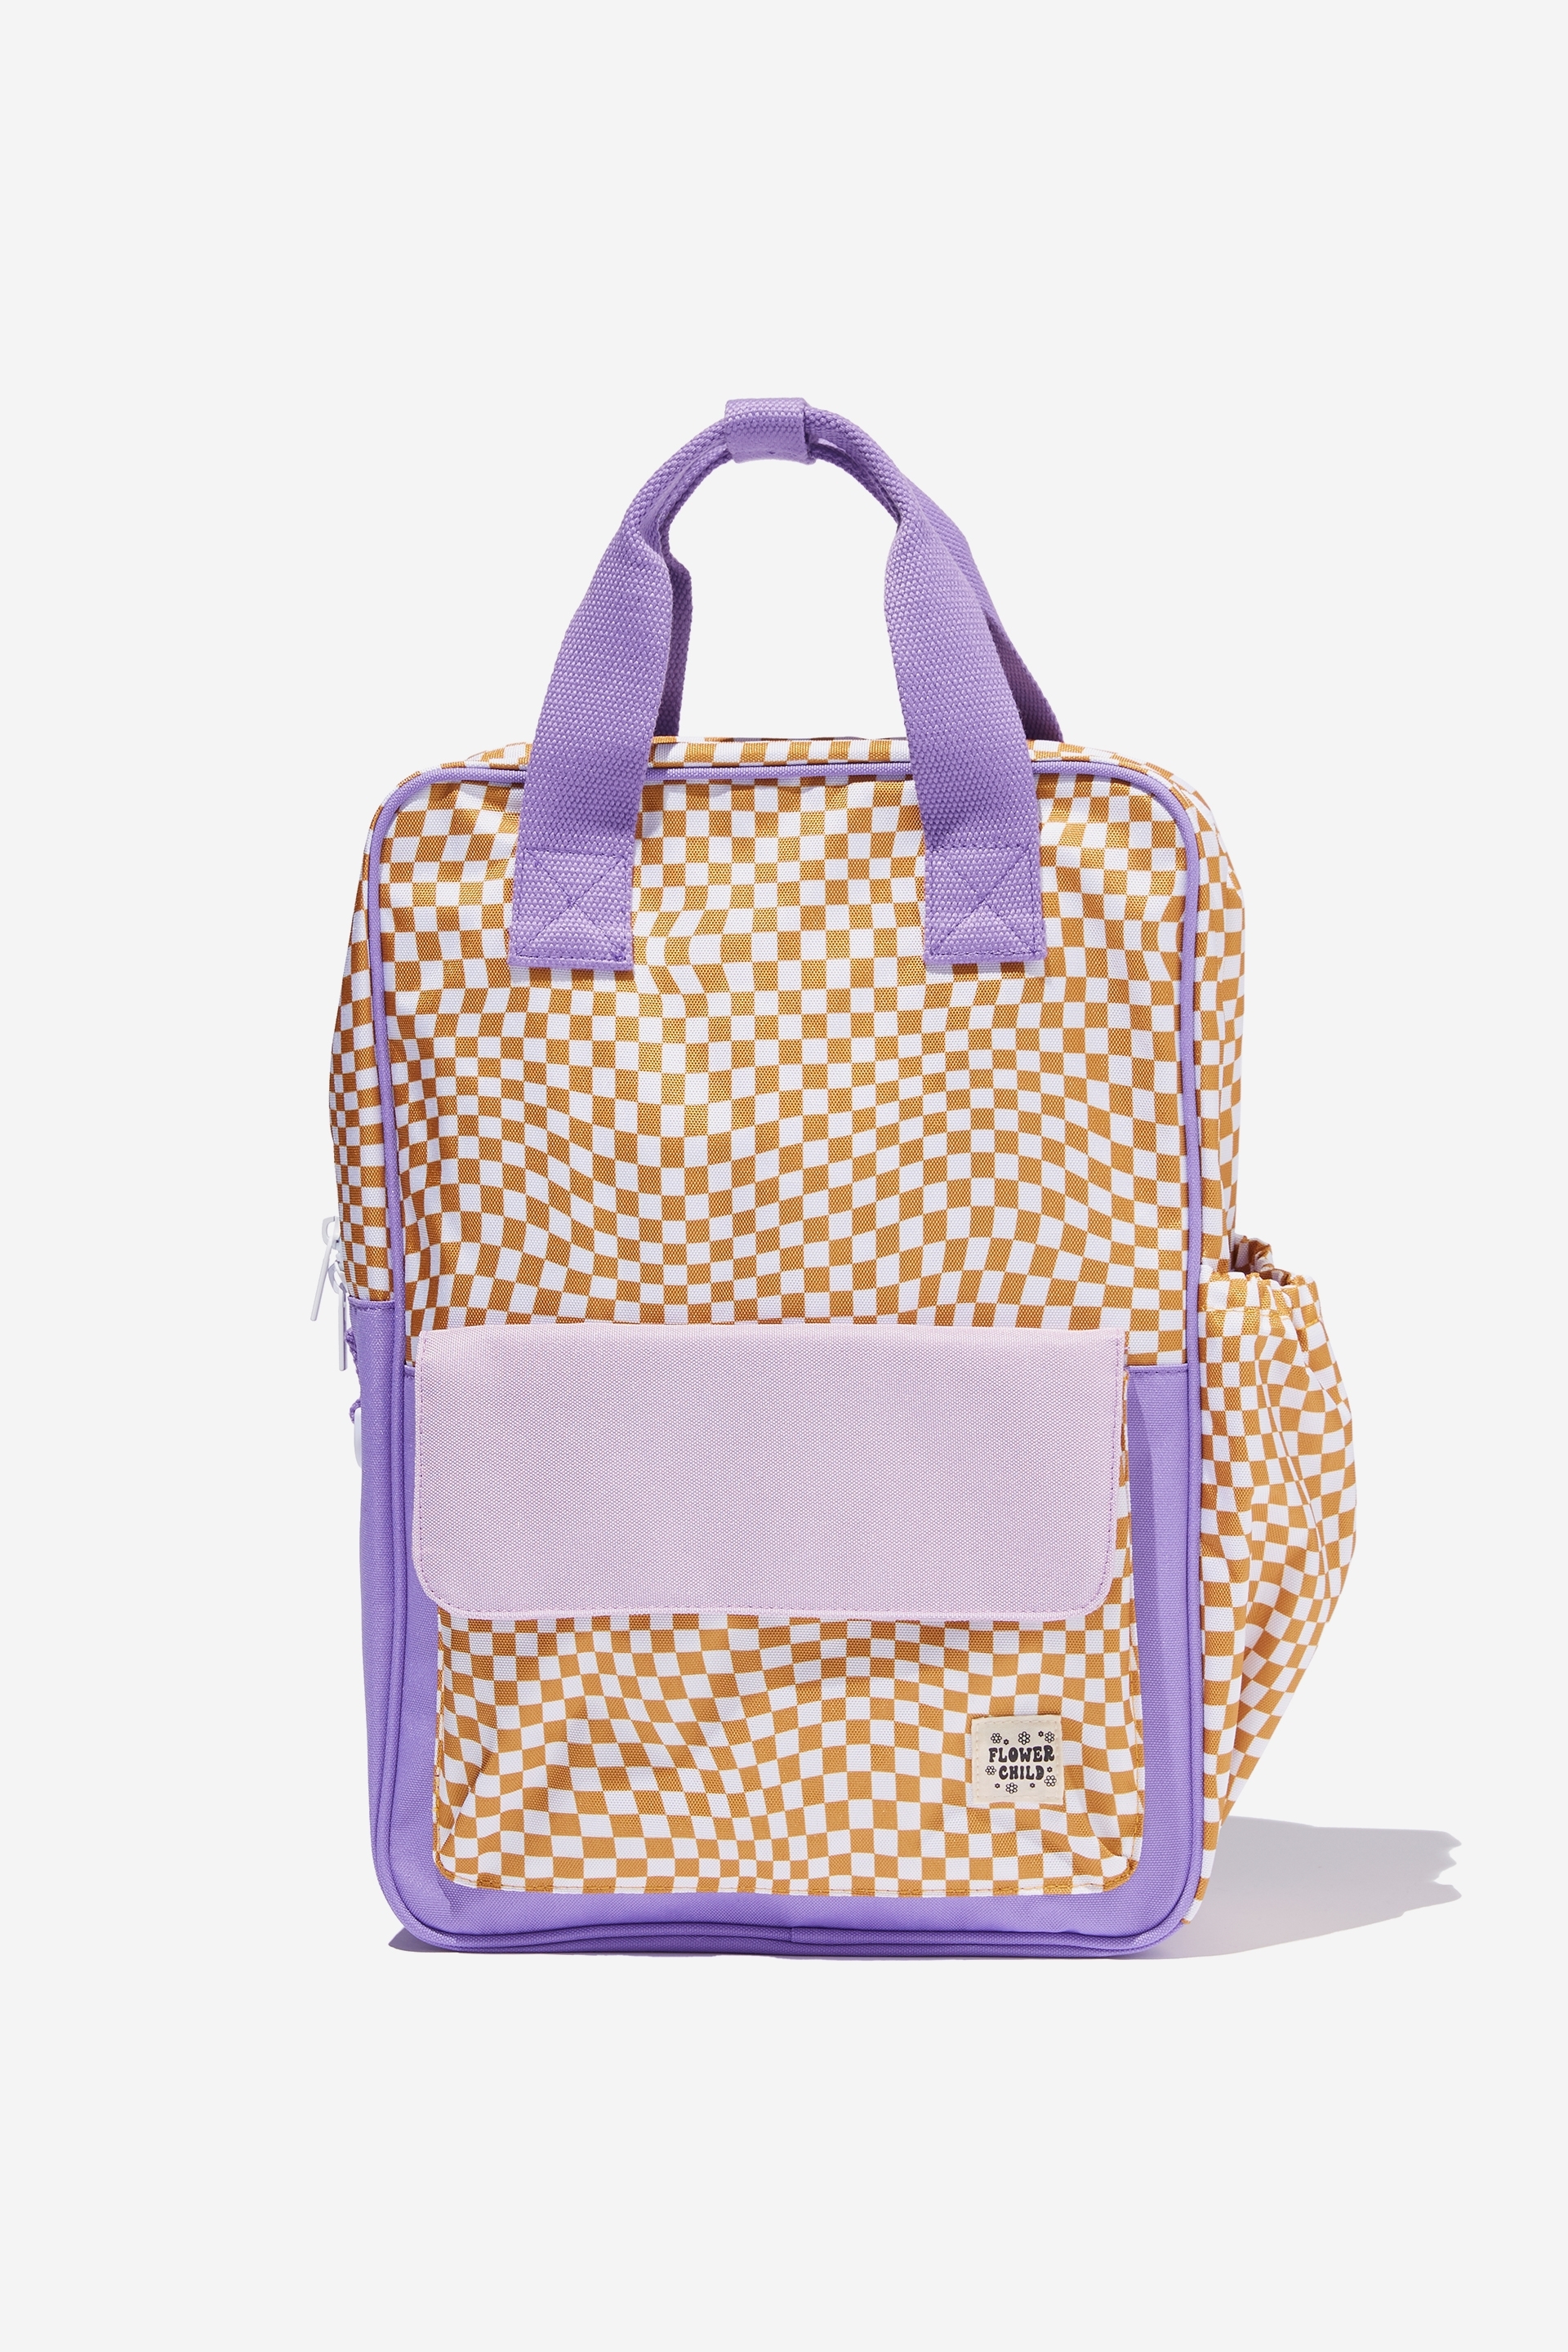 Cotton On Kids - Back To It Backpack - Smokey lilac/warped checkerboard